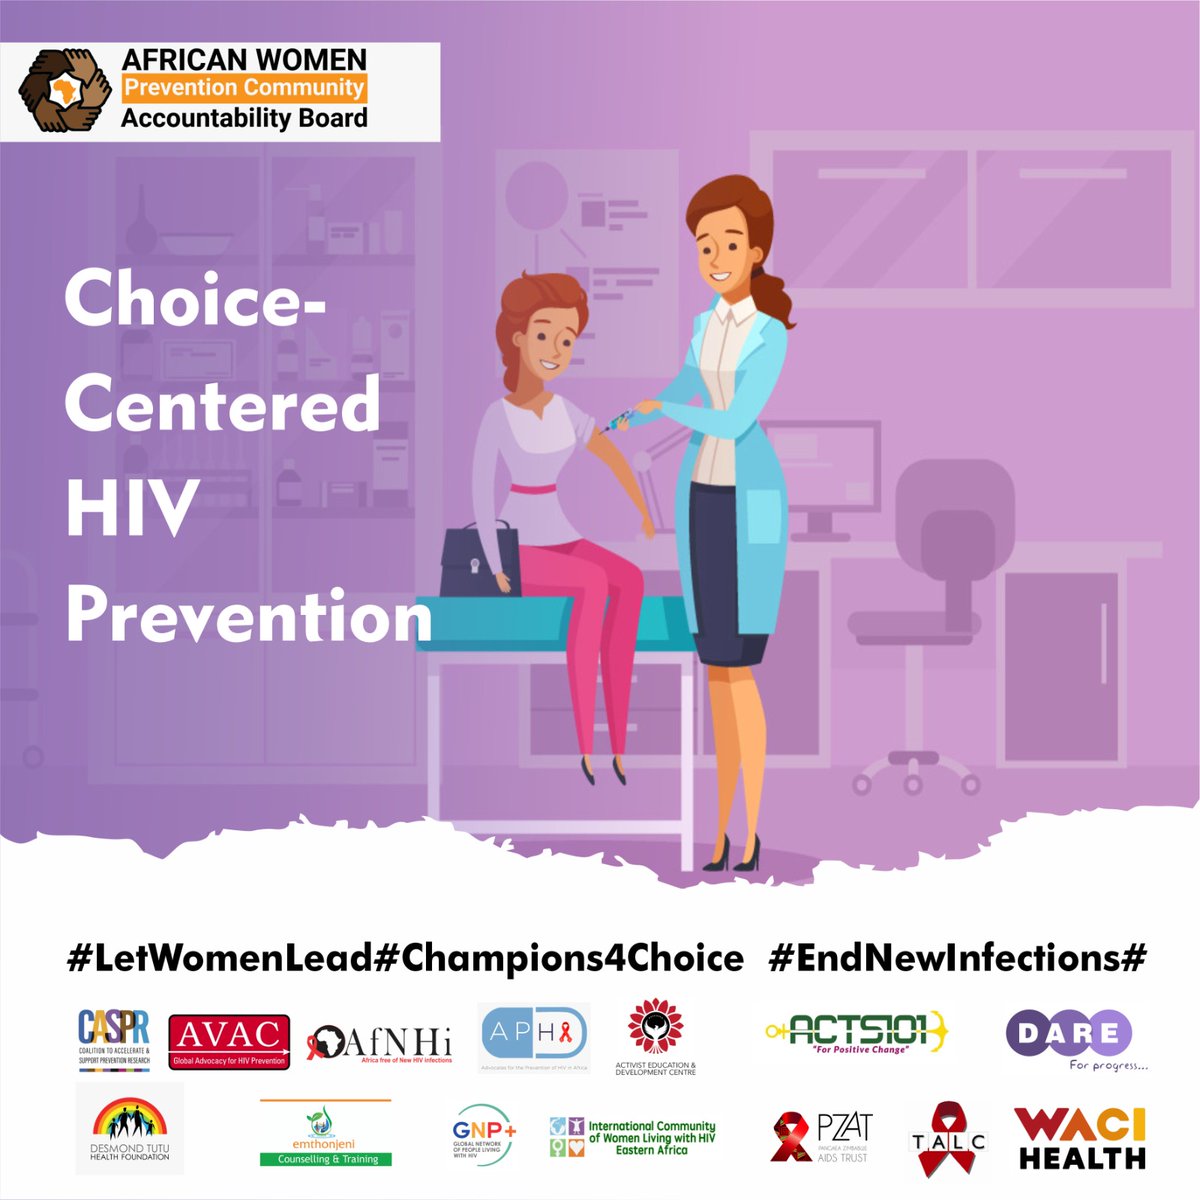 The #ChoiceManifesto is a commitment to community-driven interventions for women and girls governed by respect, integrity, and transparency. #EndNewInfections #Champions4Choice #dareforprogress #U4PTanzania #letwomenlead #fundthering #facilitatechoice